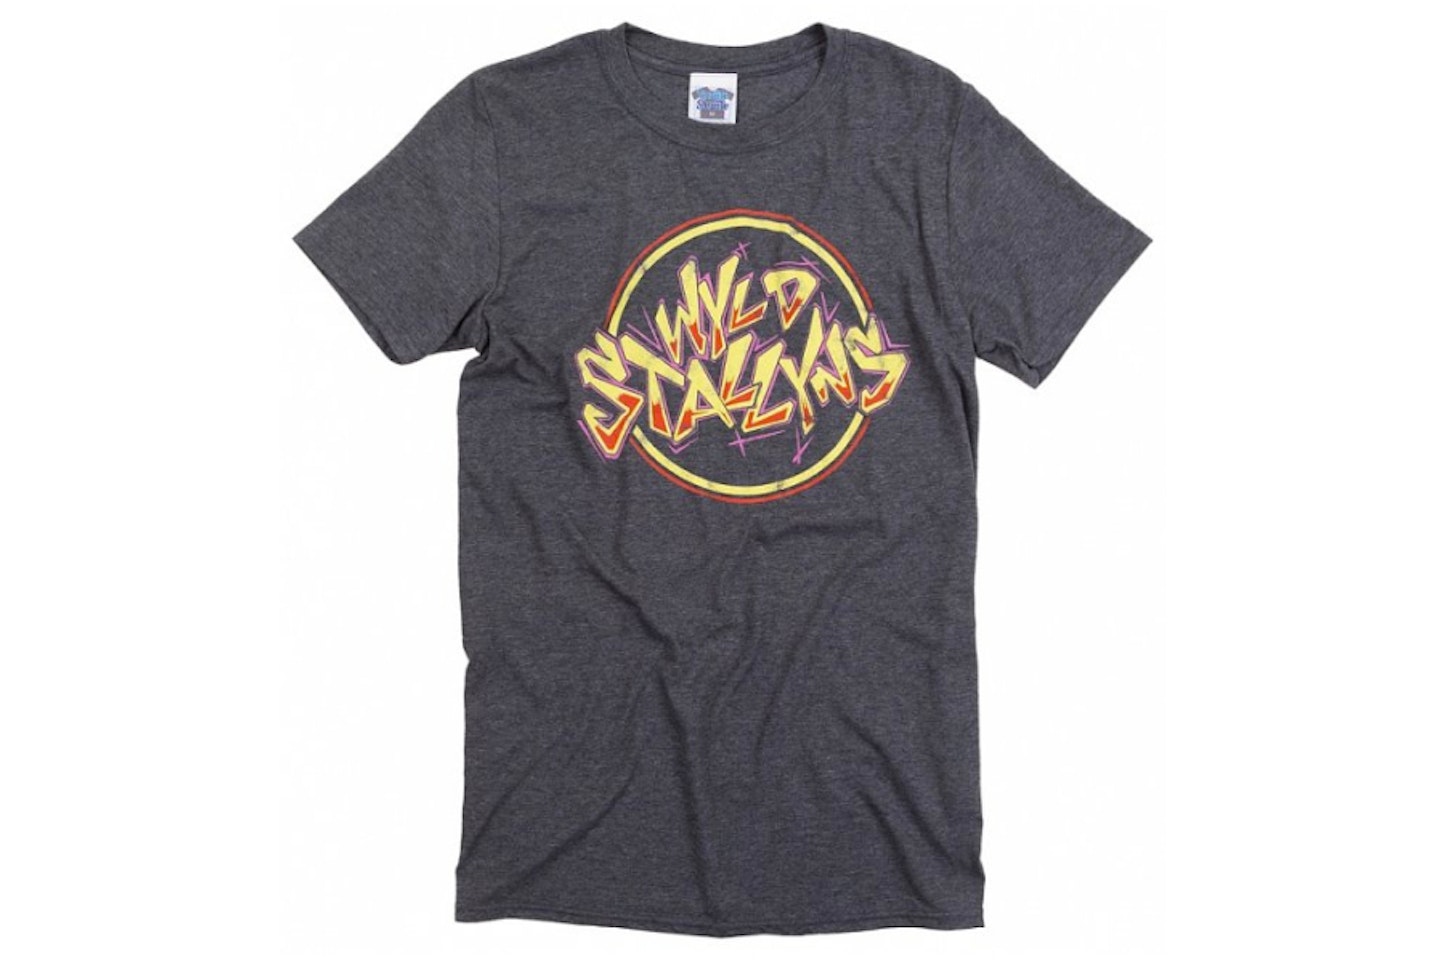 Bill And Ted Wyld Stallyns T-Shirt, £19.99